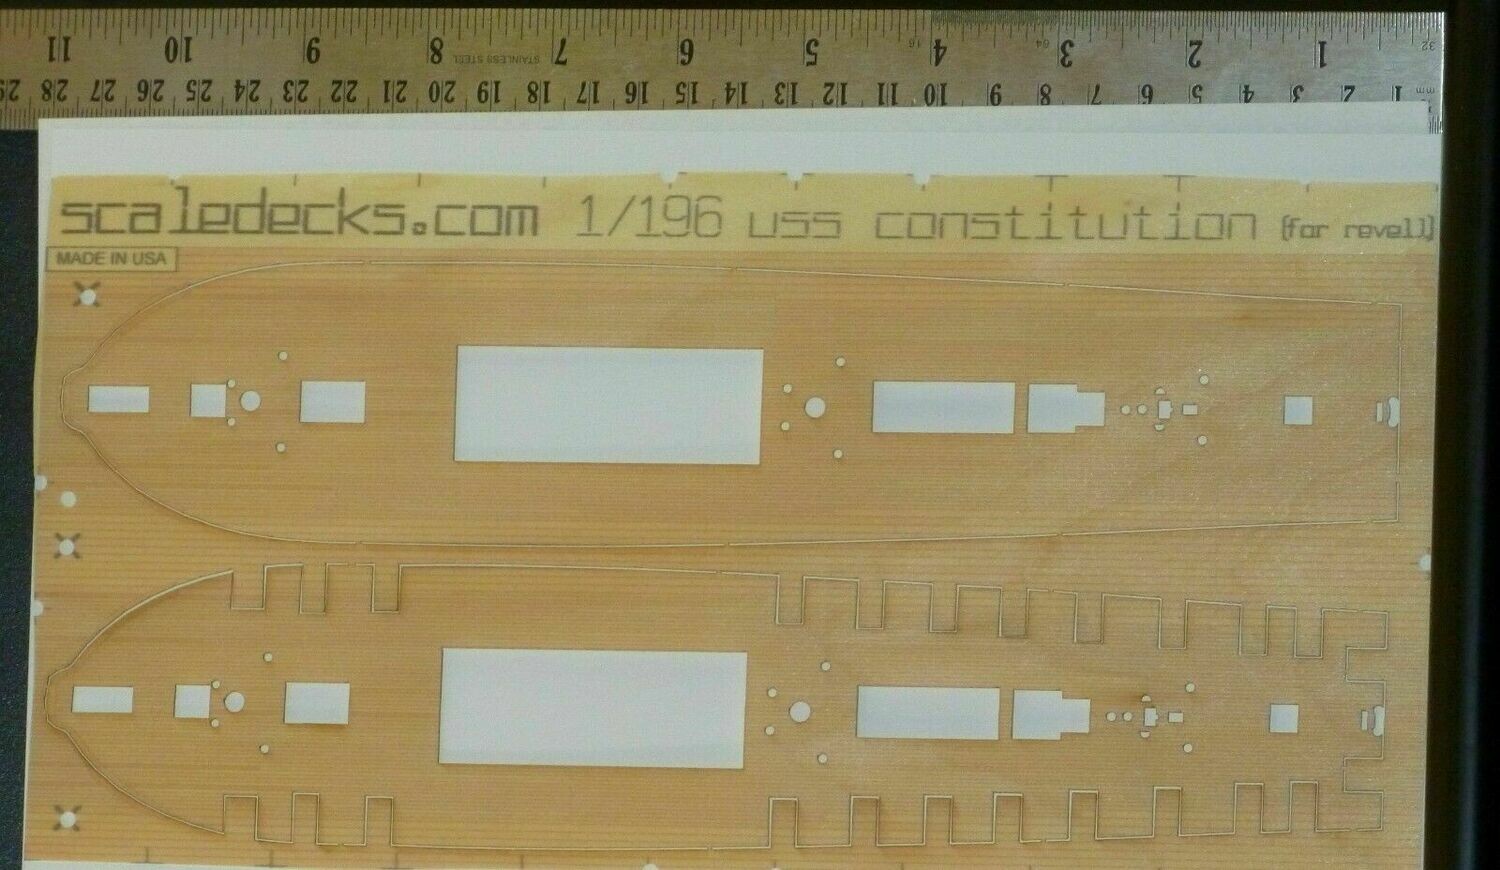 LCD-80 Wood Deck for 1/196 USS Constitution fits small Revell kit scaledecks 